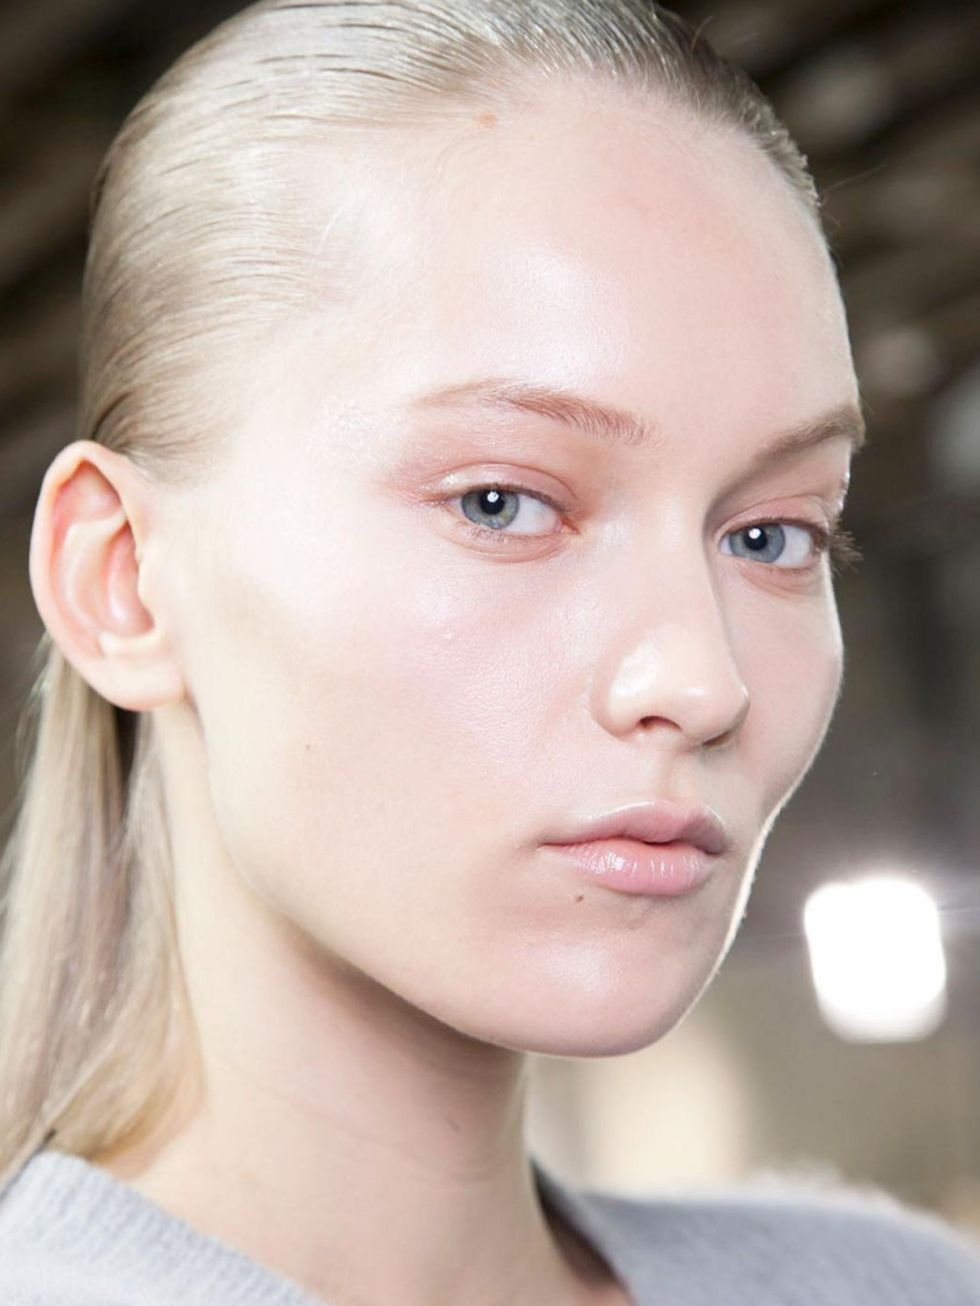 <p>Make-up artist Val Garland was inspired by women today when she created this barely-there, yet beautiful make-up look. At the corner of each eye Garland used a flat, square brush to paint on a graphic slick of pearlescent, translucent shimmer that caug